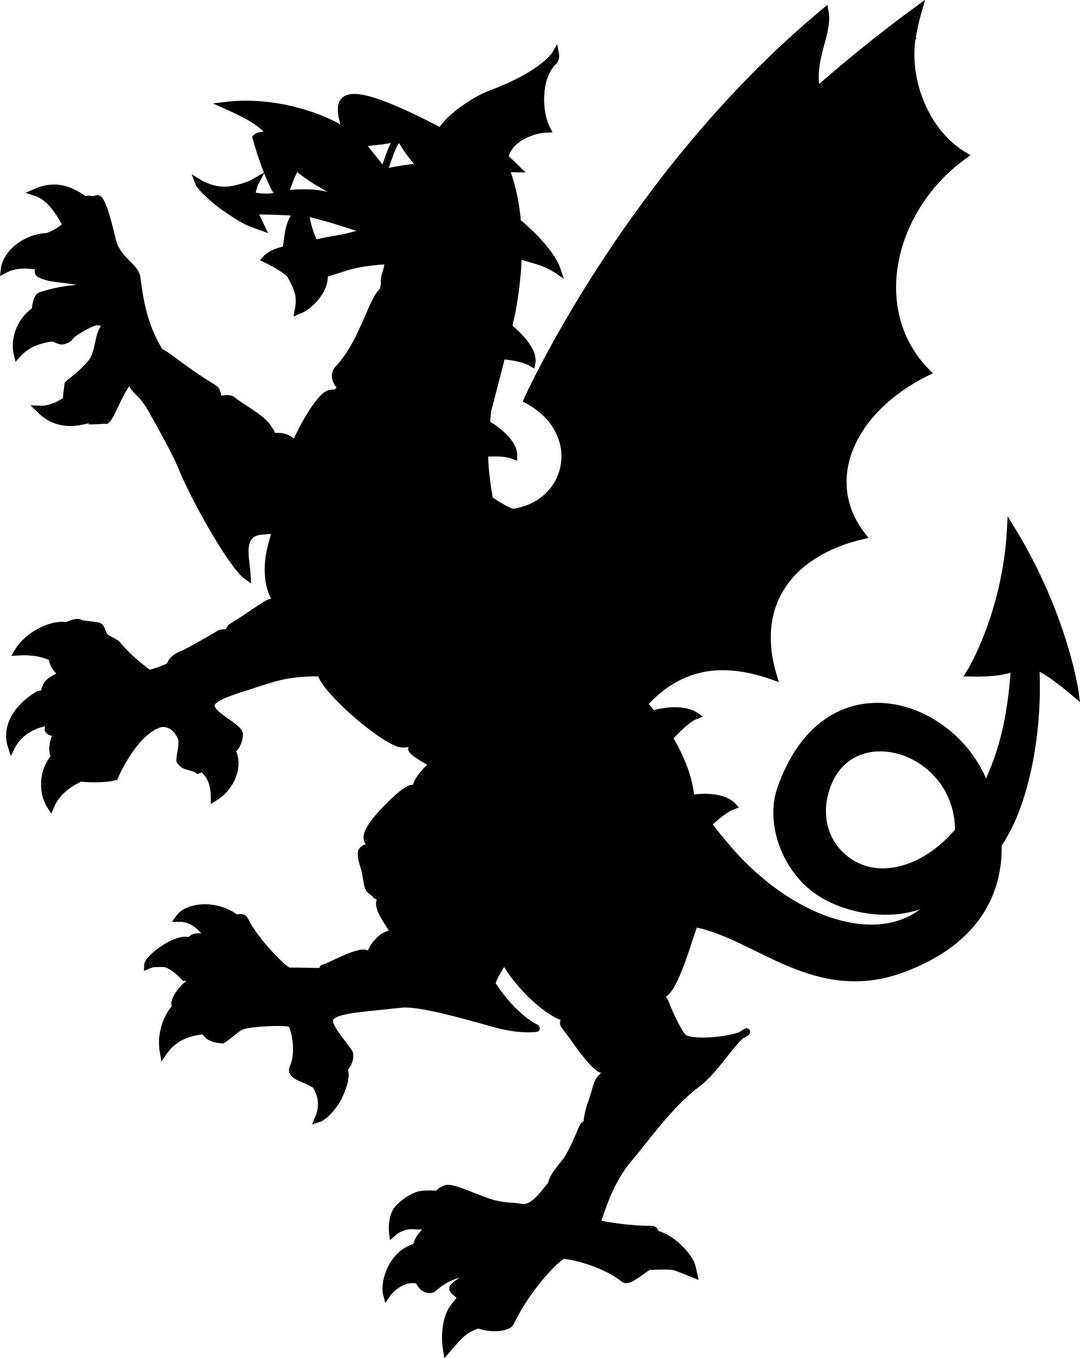 Somerset dragon silhouette png transparent